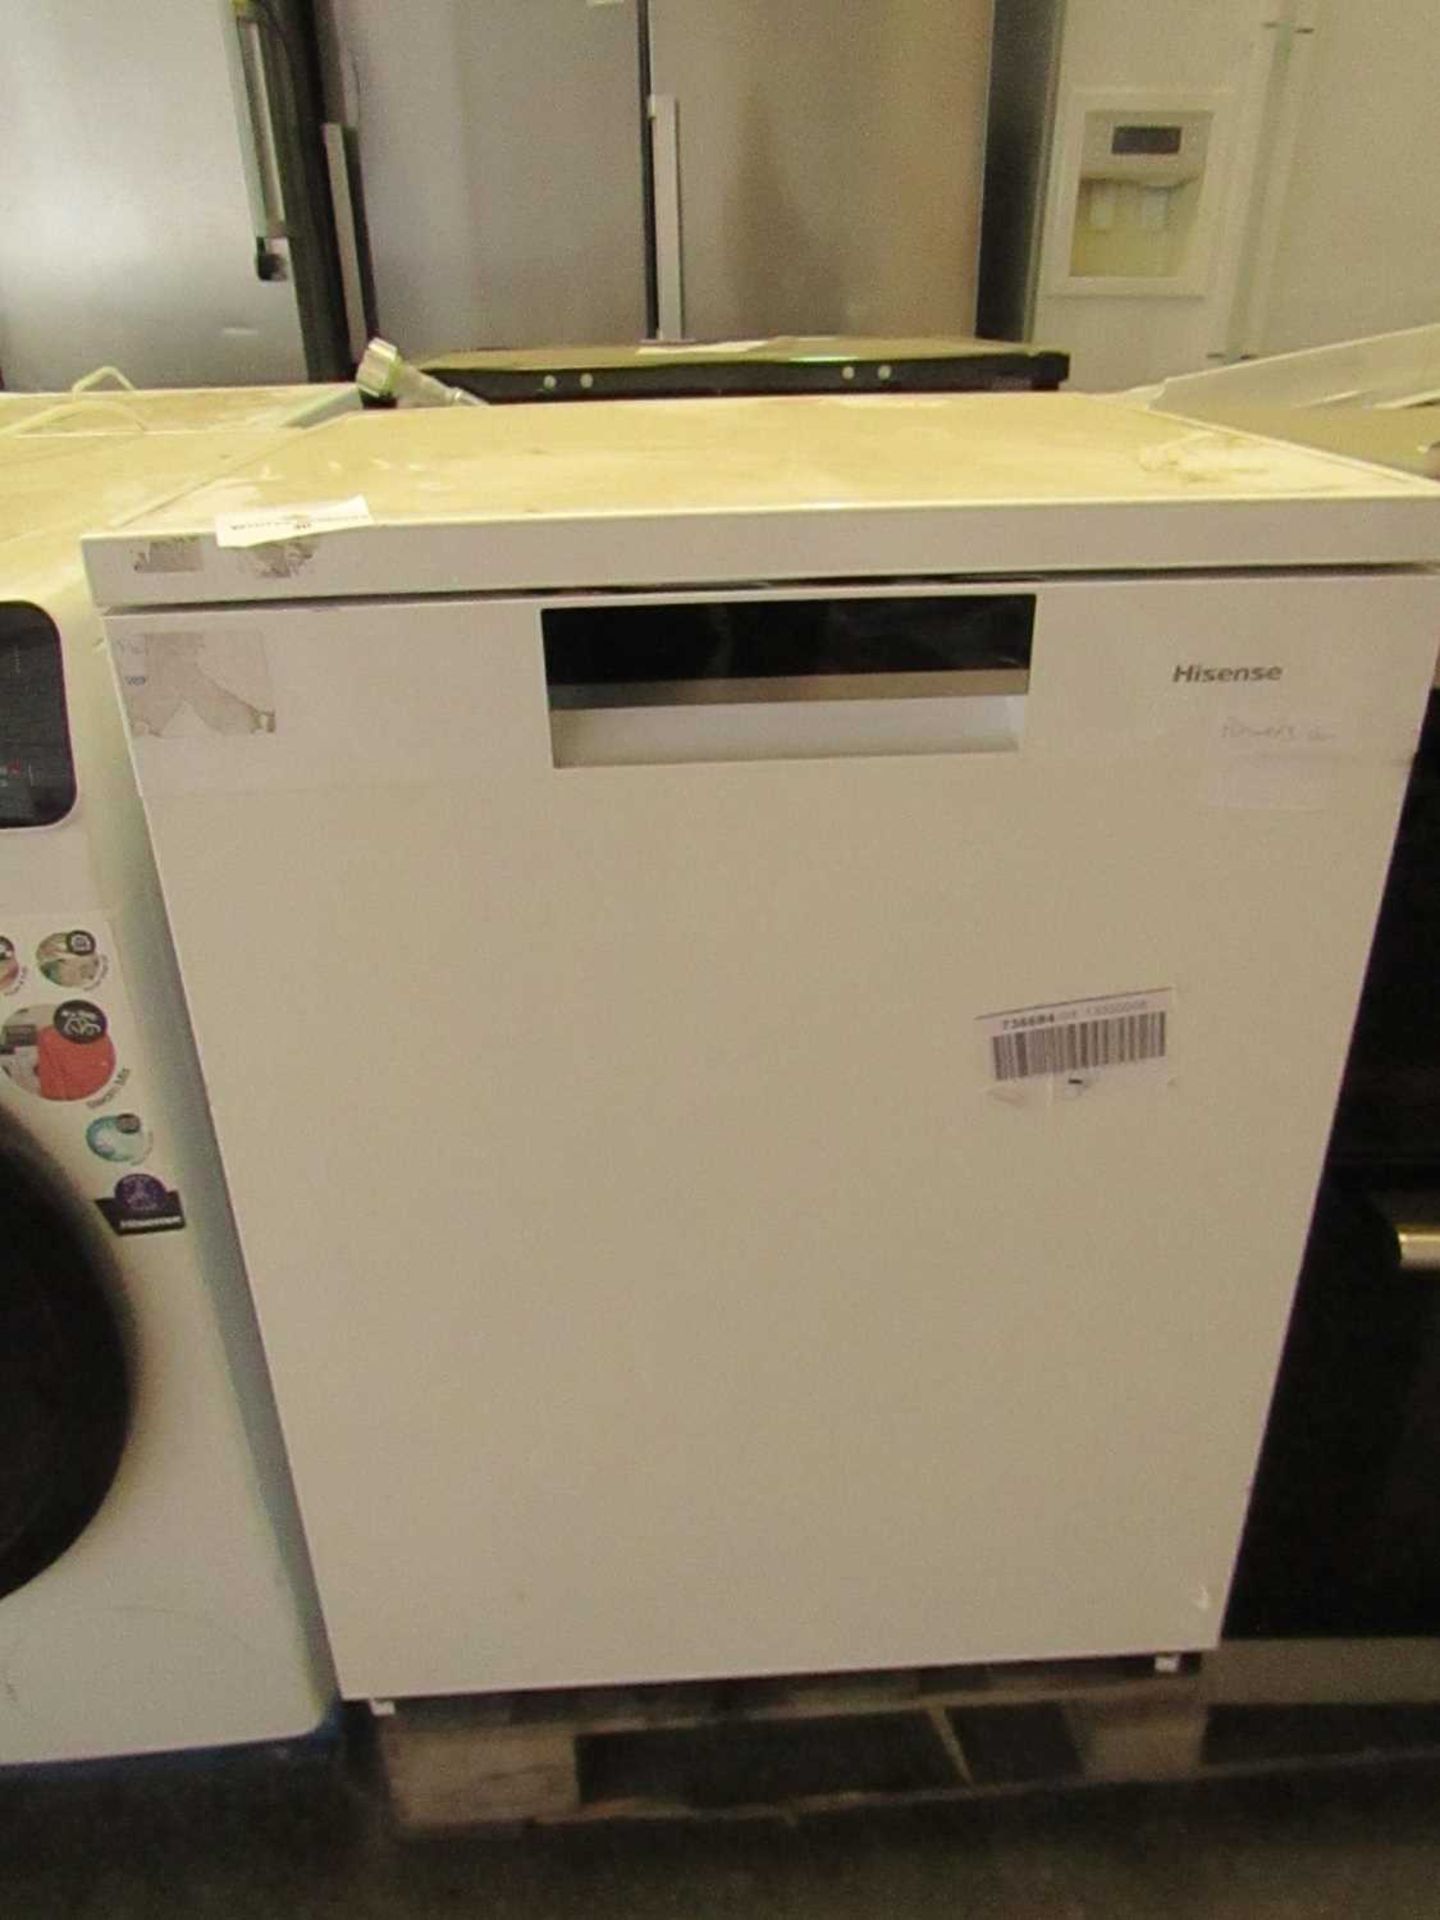 VAT Hisense HS661C60WUK Dishwasher - Item Powers On but we cannot test any further without